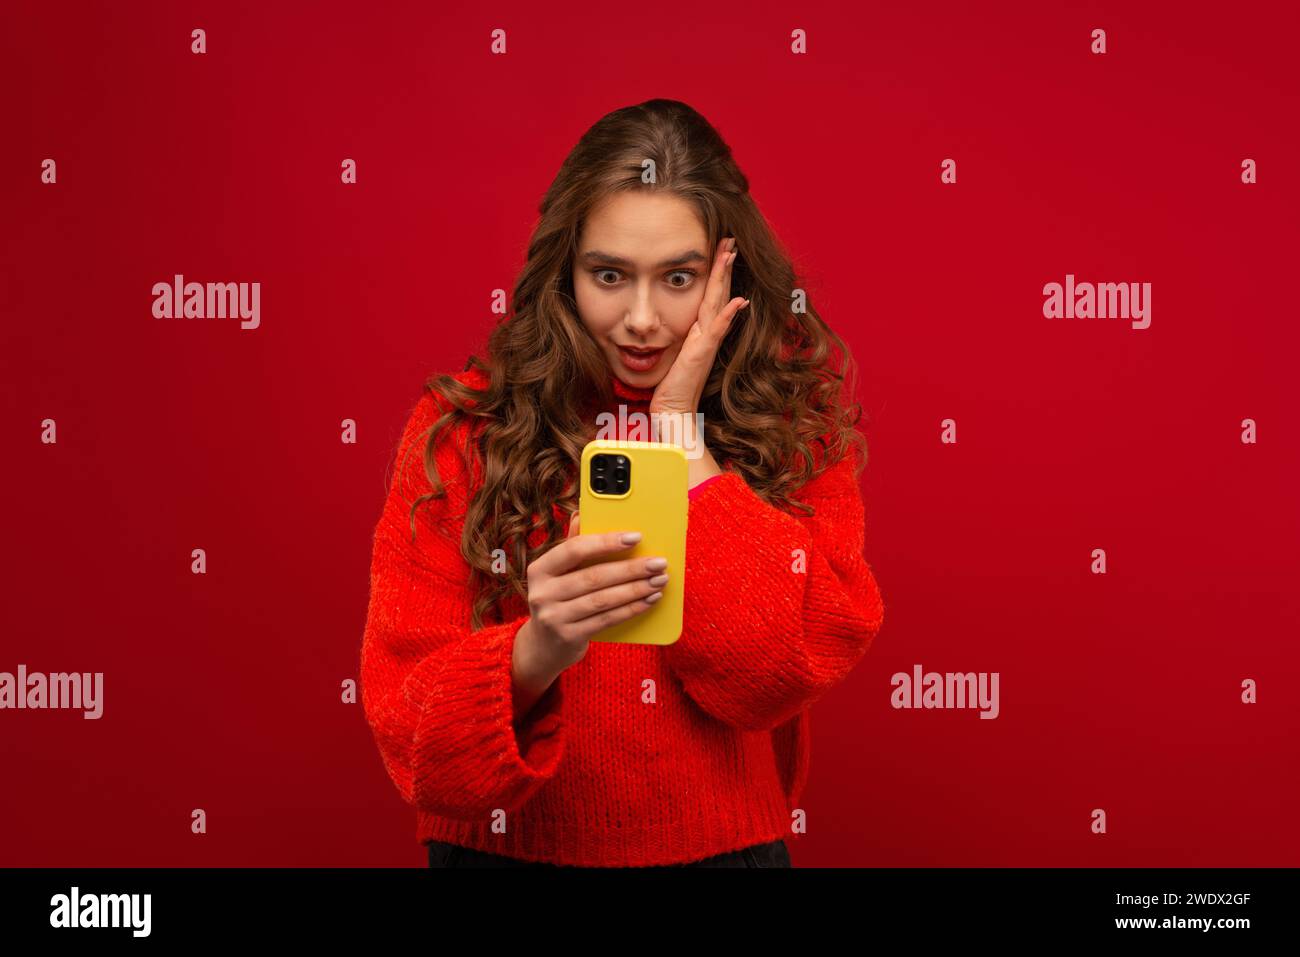 Portrait of a smiling emotional young woman in curly hair Generation Z in a red sweater using a modern smartphone in a studio shot red background Stock Photo